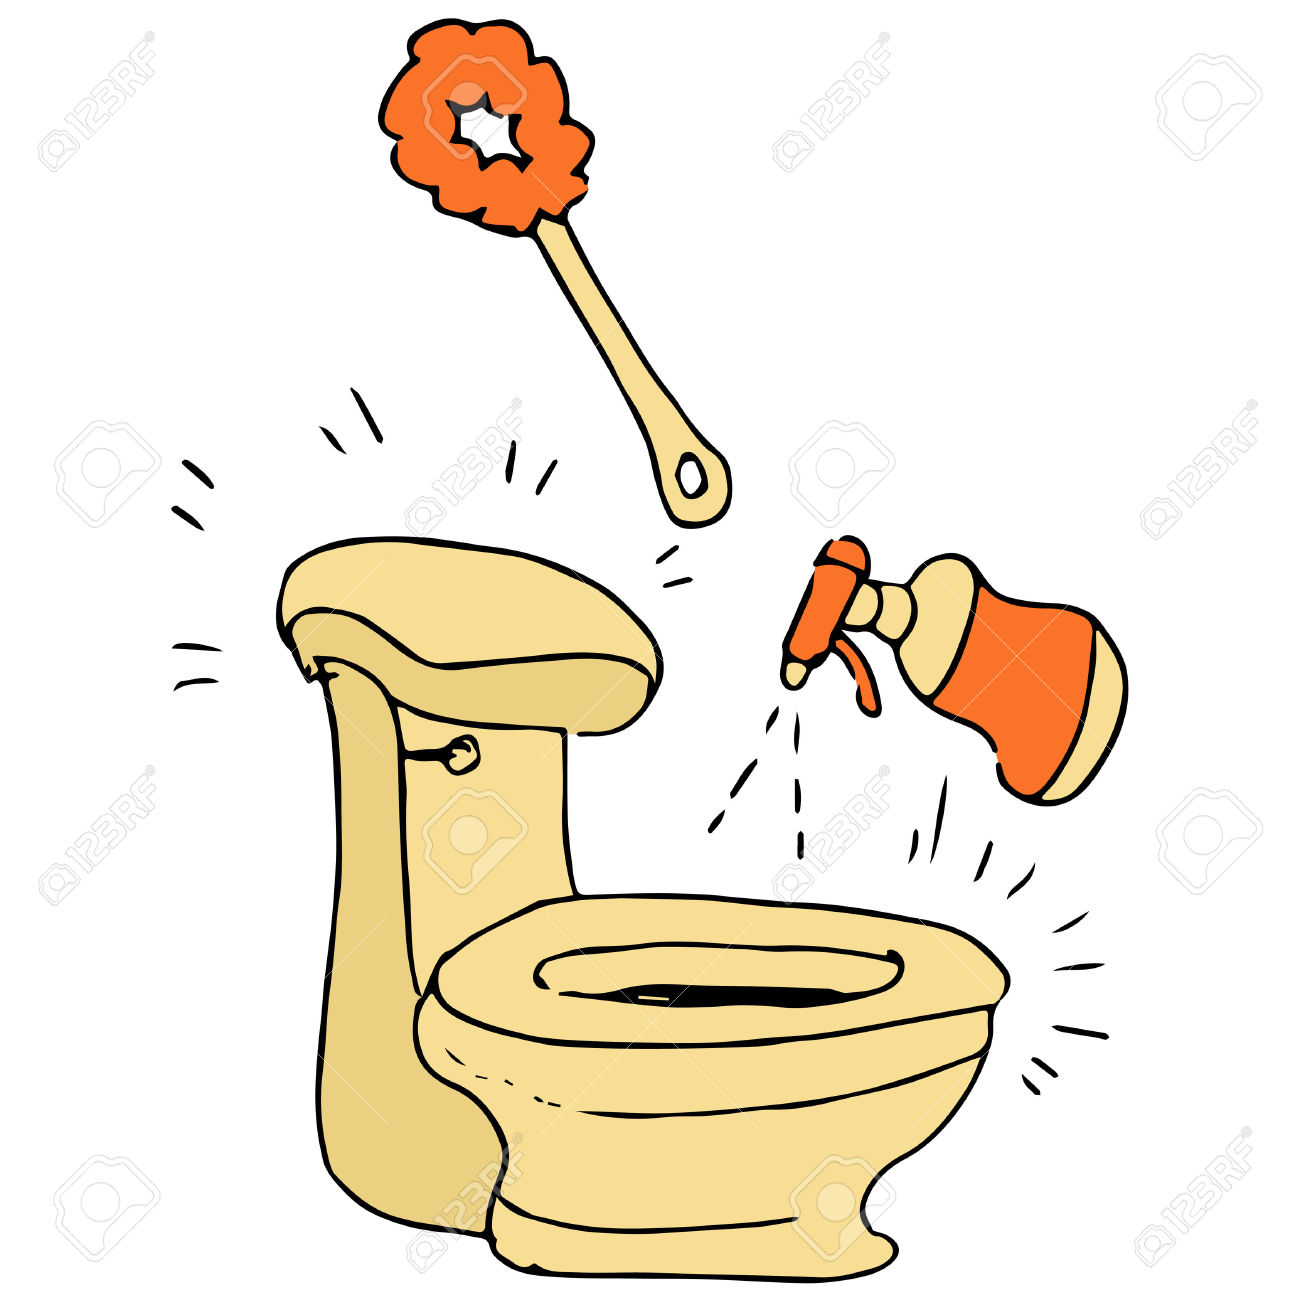 toilet cleaning clipart - photo #12